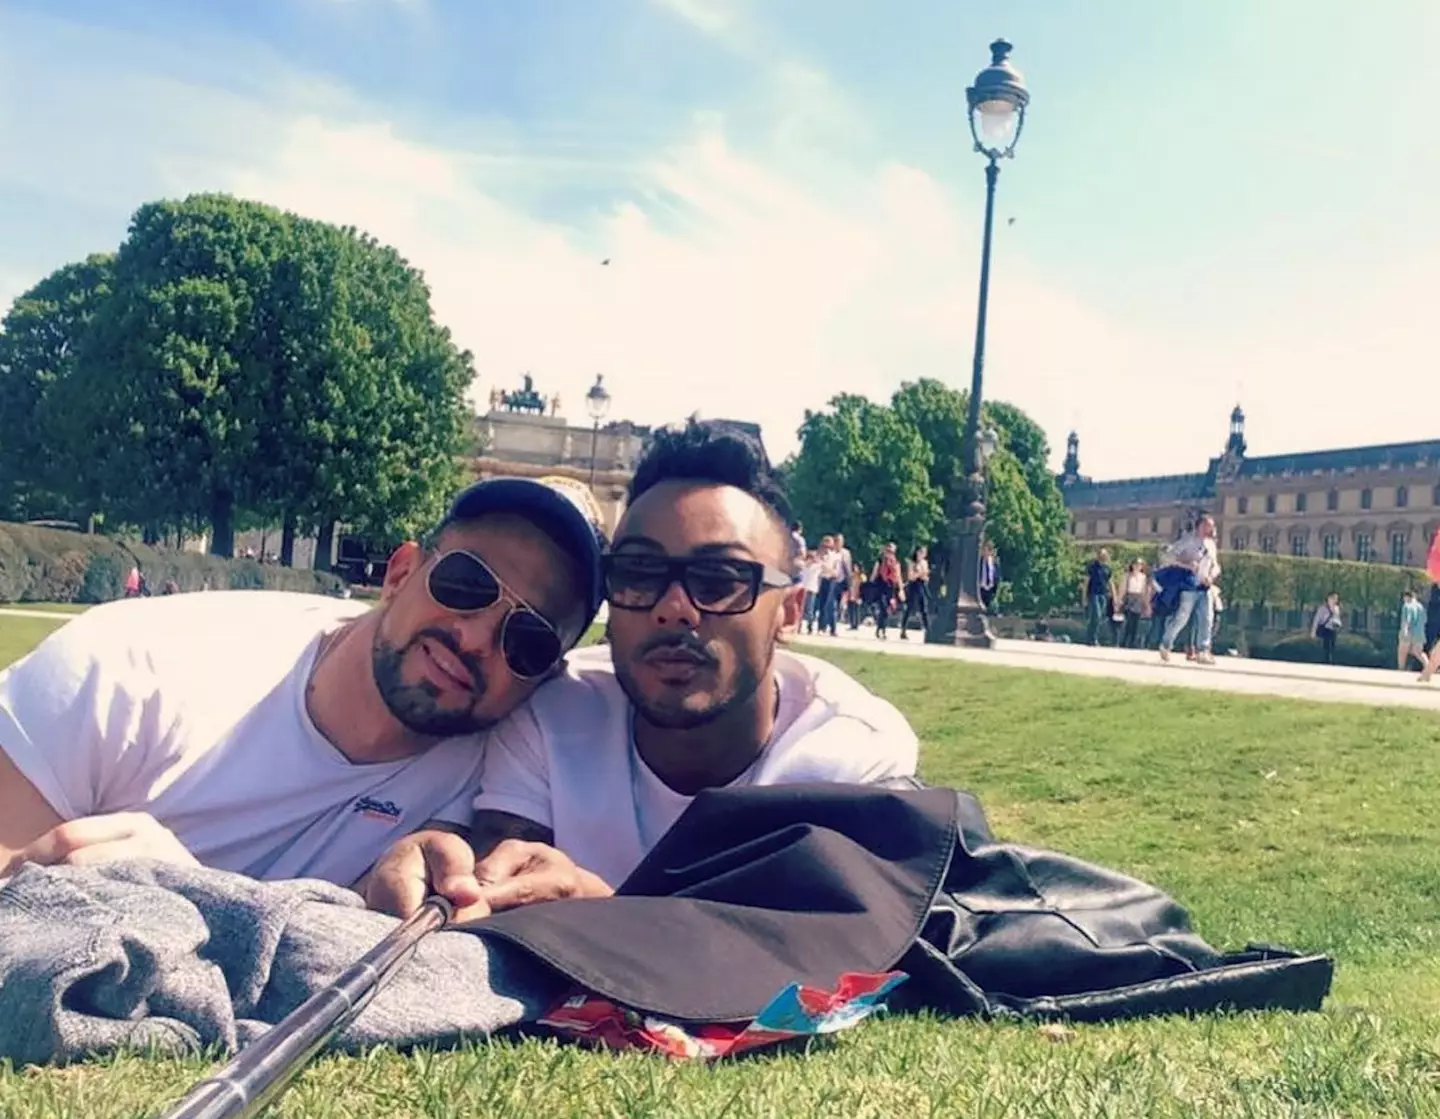 Robin's boyfriend, Marcus Collins, has since shared an emotional tribute to Instagram.